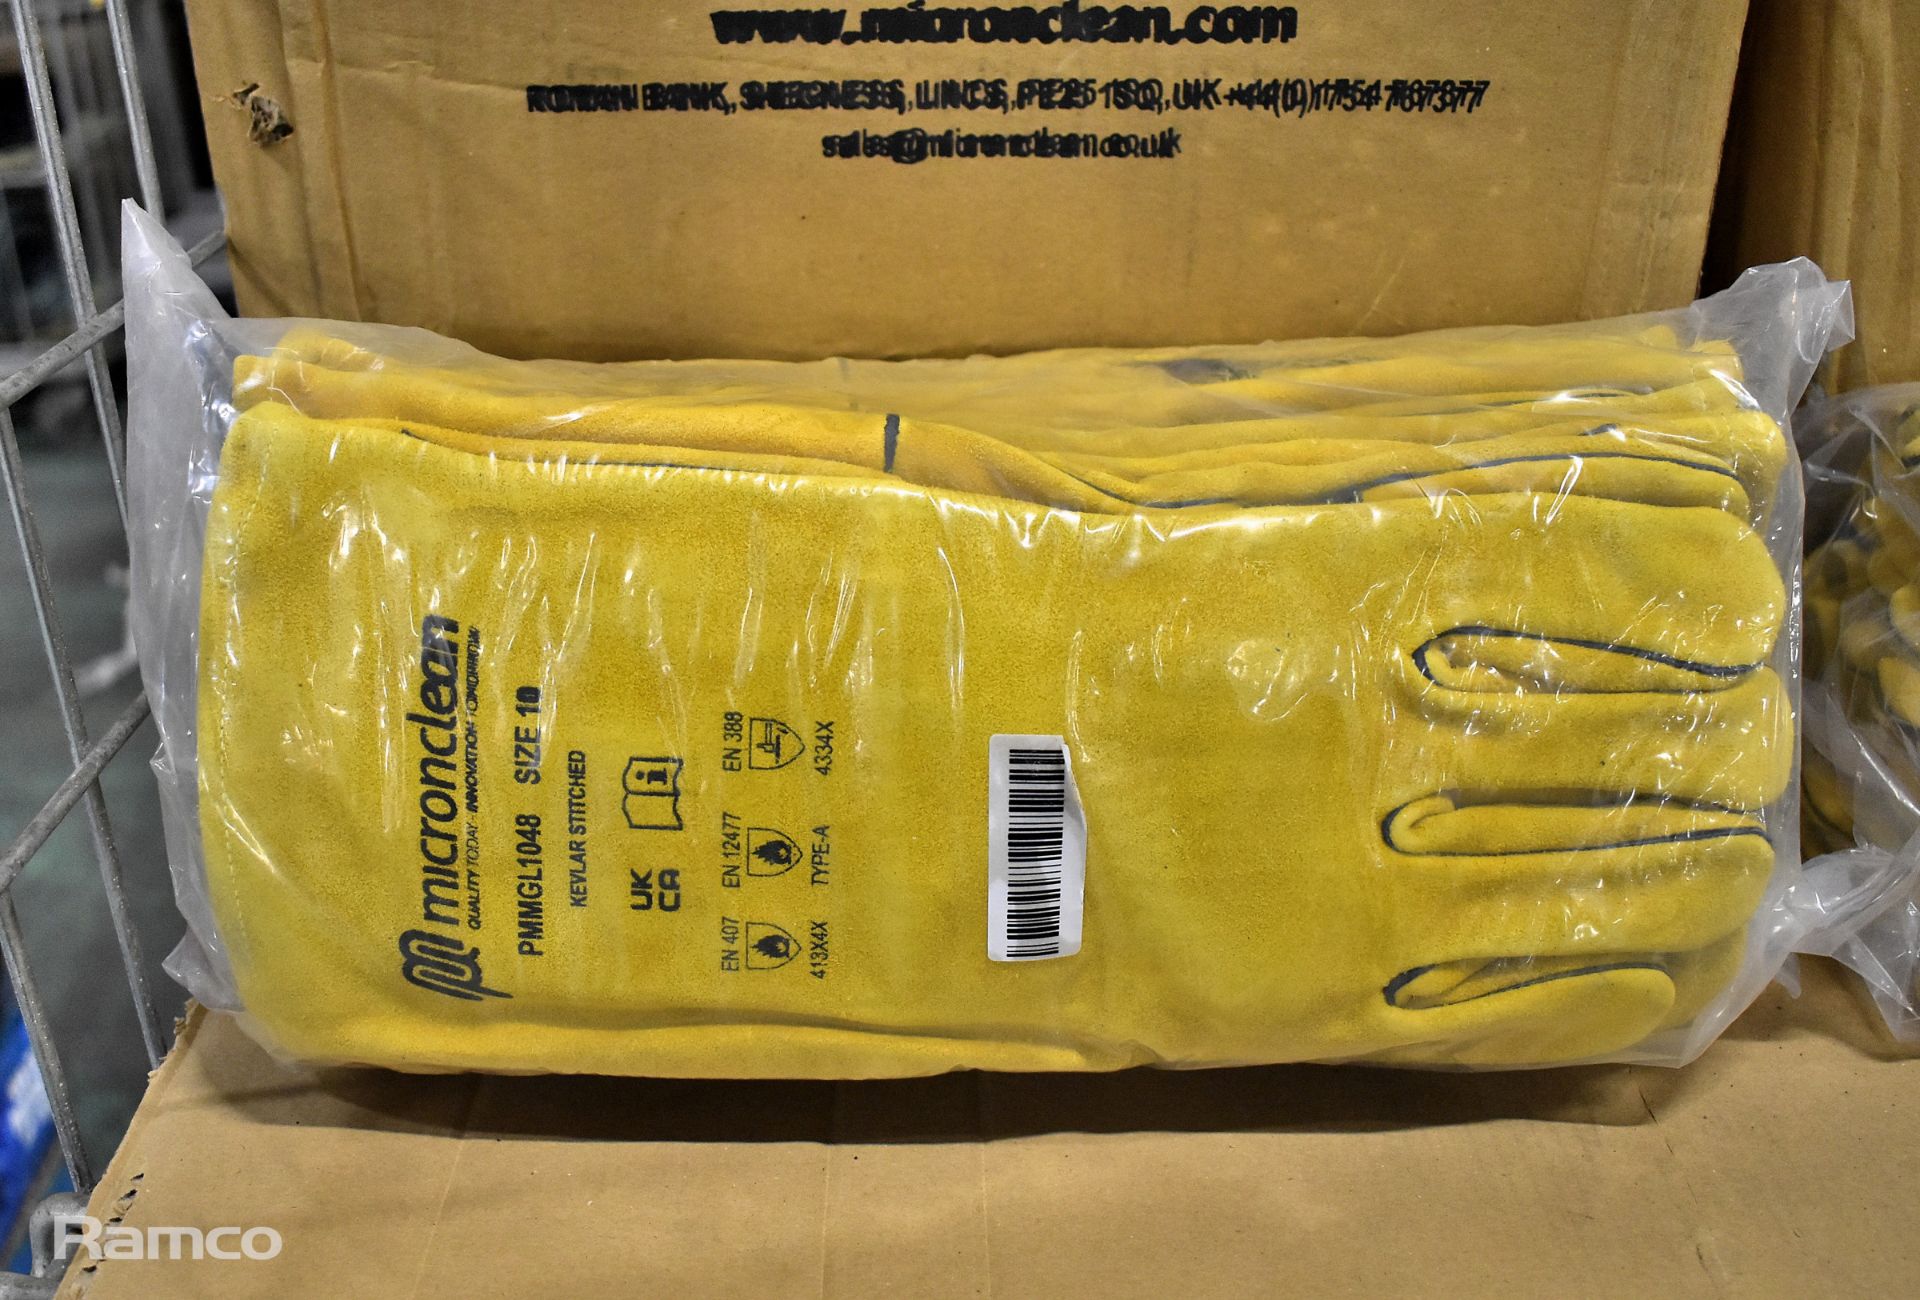 Micronclean Leather kevlar STC cat 2 mig gauntlets size 10 - 1 box - 48 pairs per box - Image 2 of 3